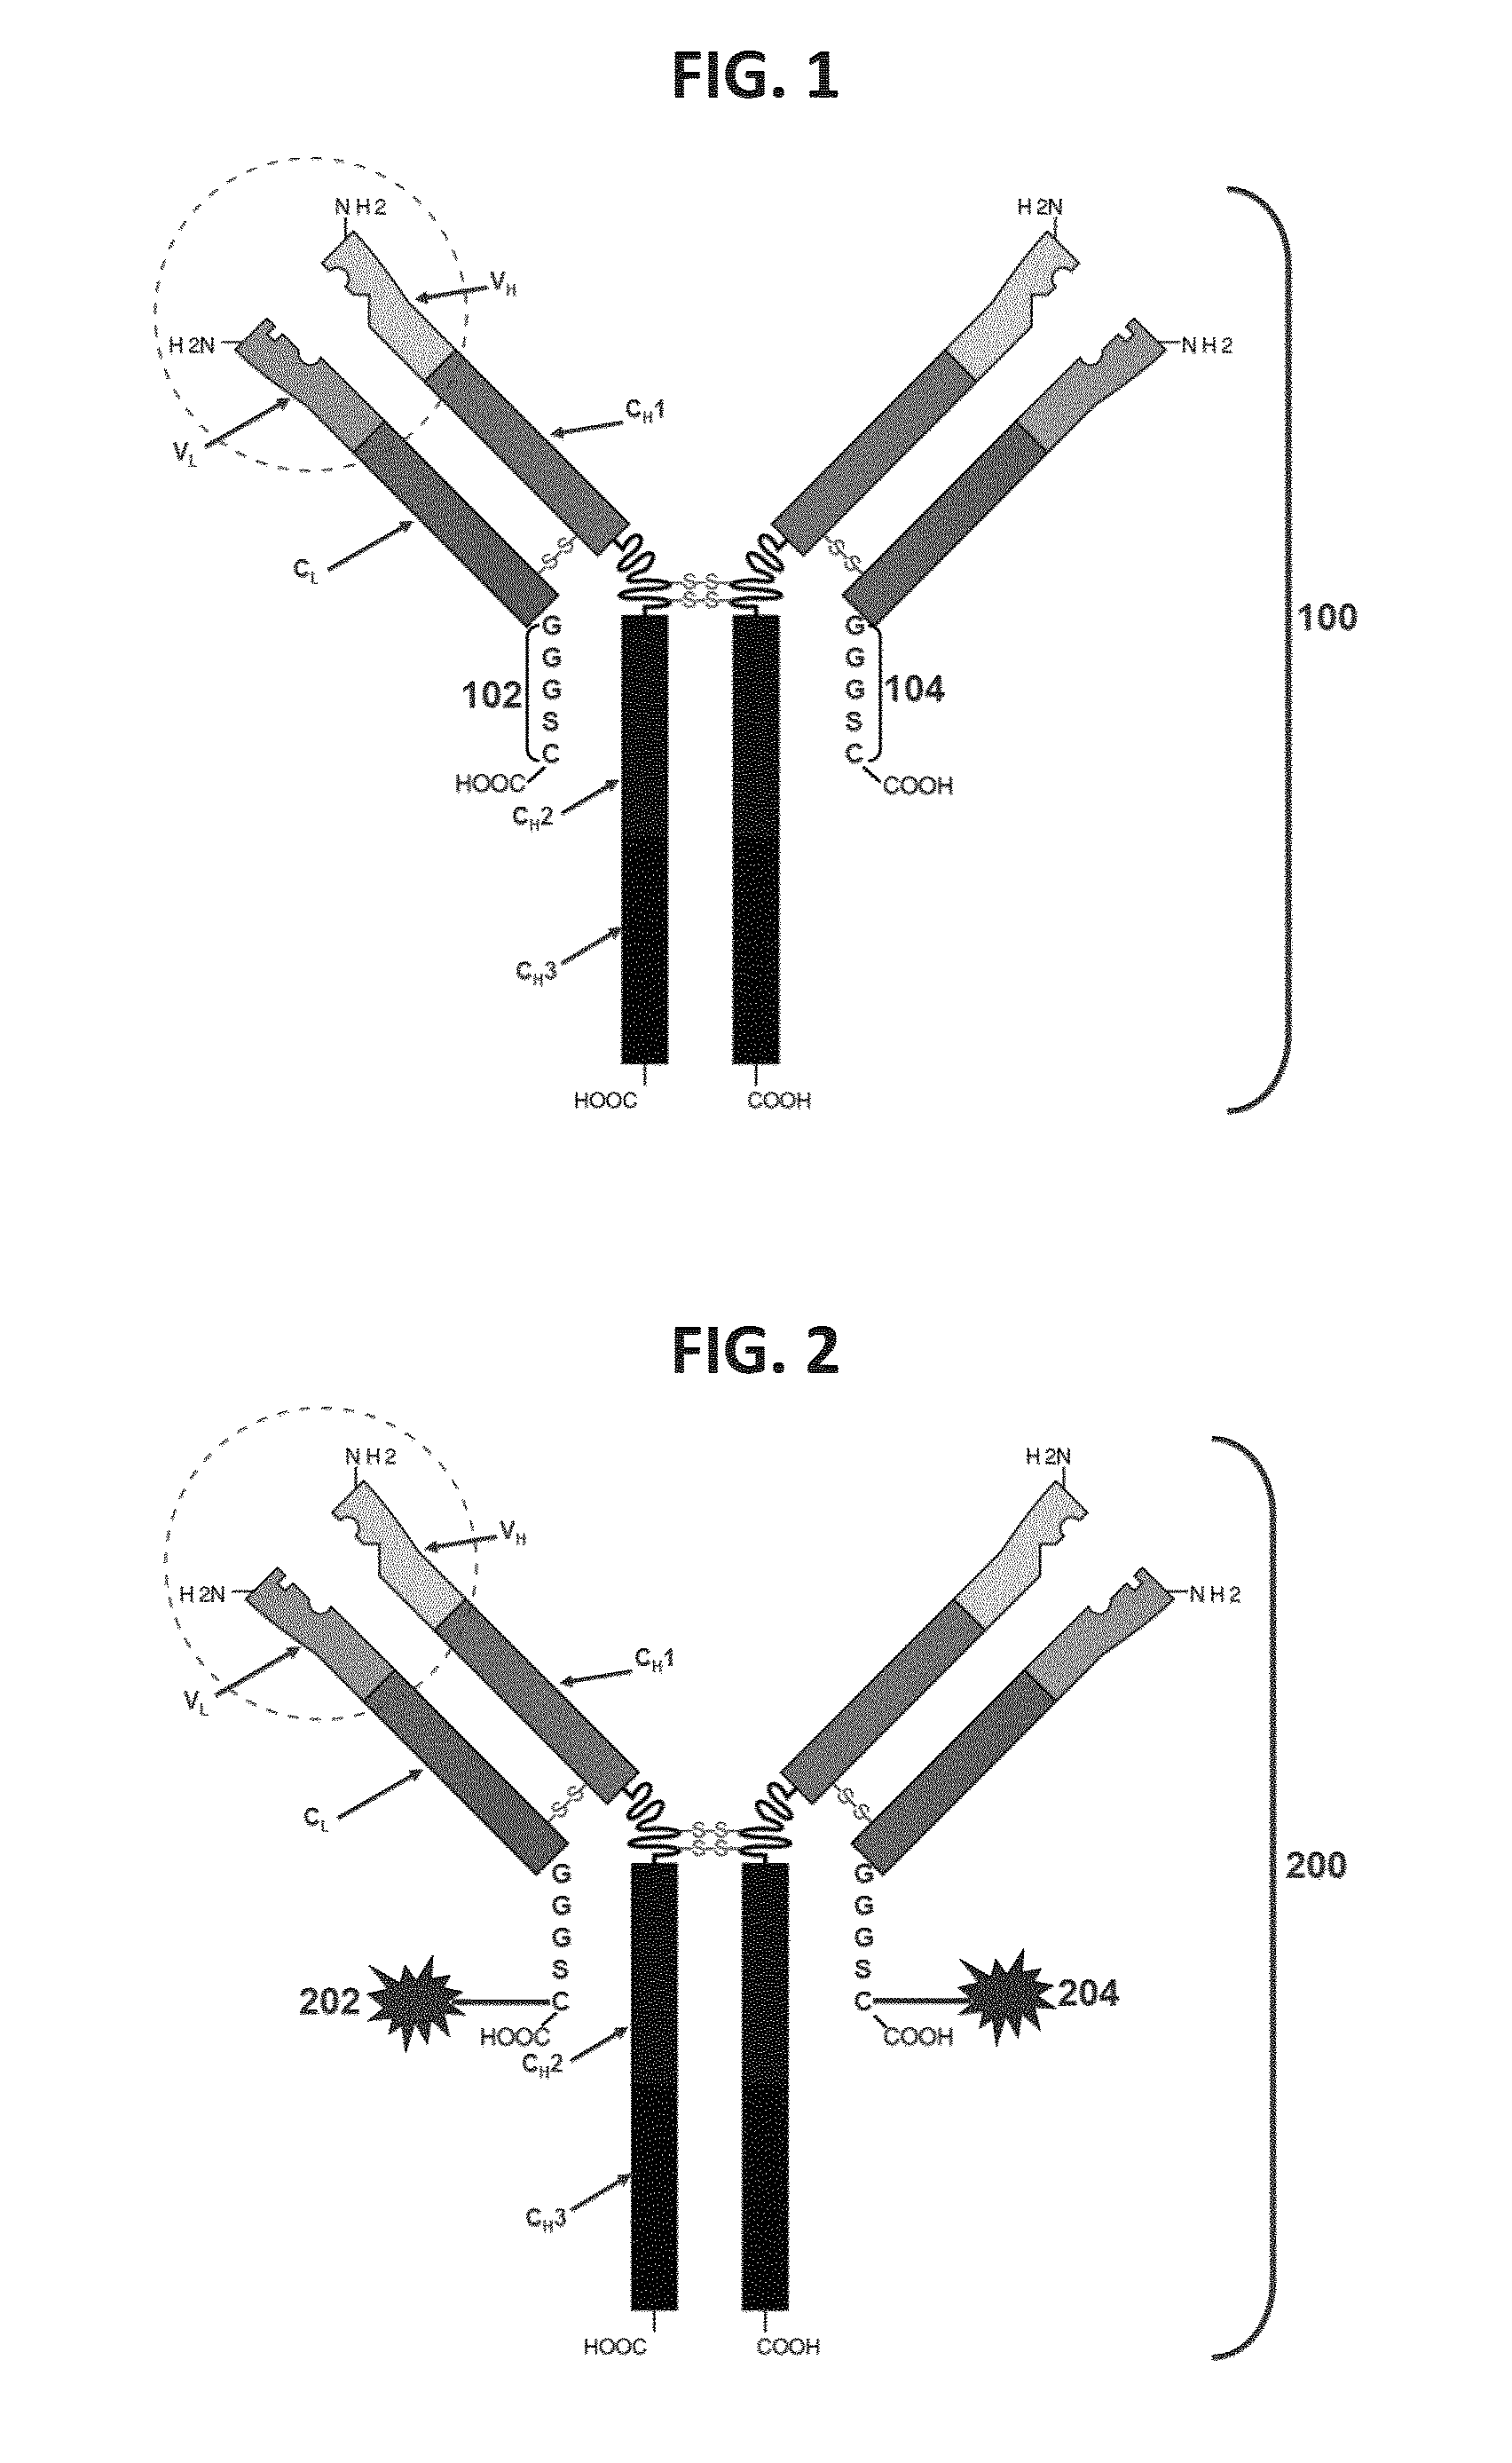 Antibodies comprising c-terminal light chain polypeptide extensions and conjugates and methods of use thereof